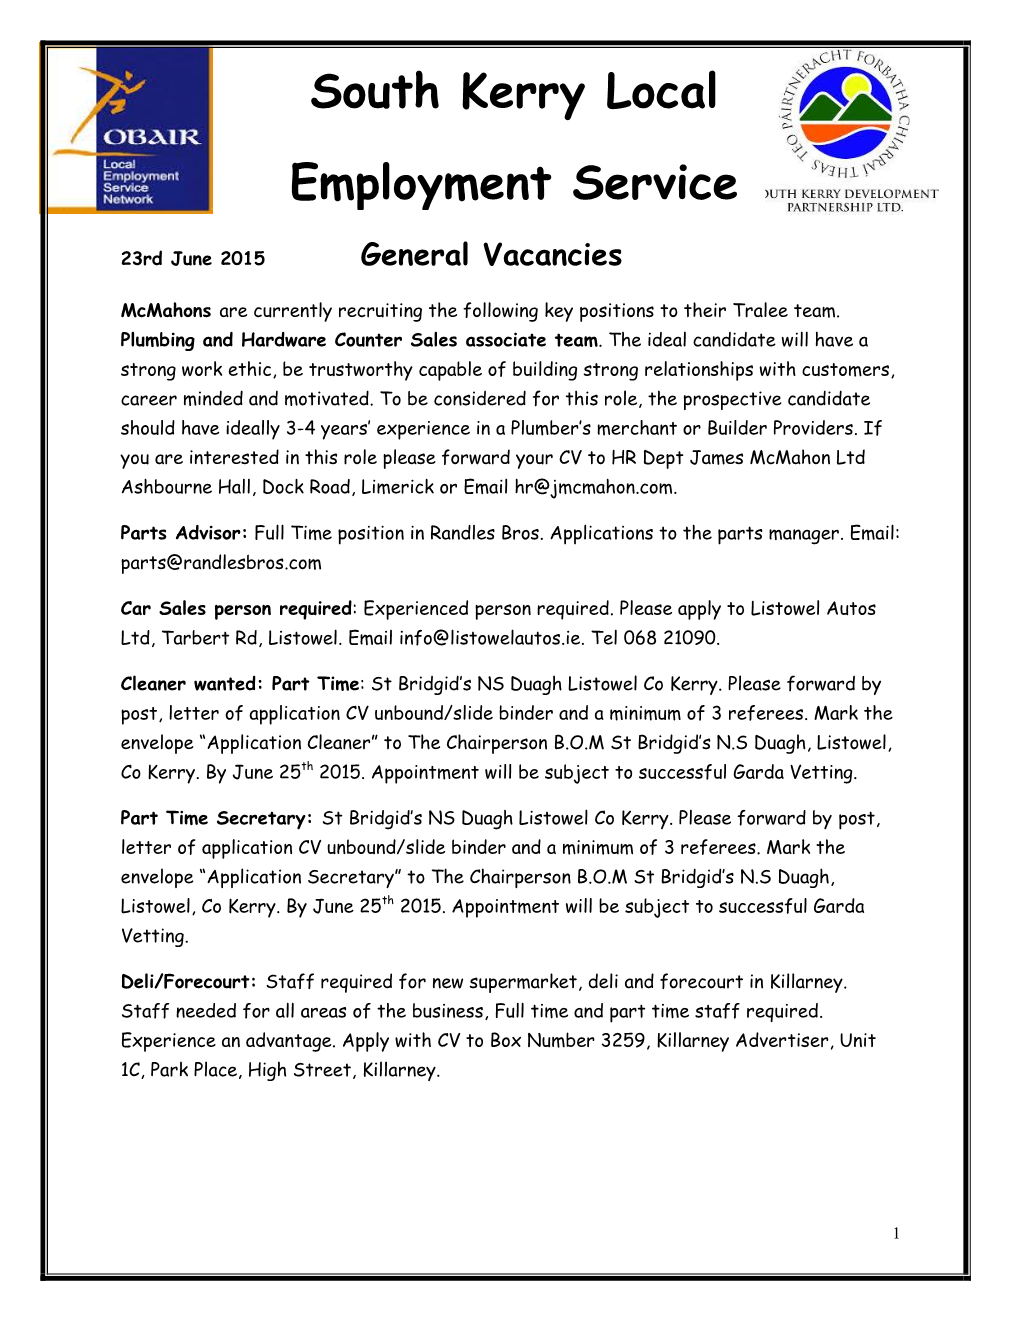 South Kerry Local Employment Service Service